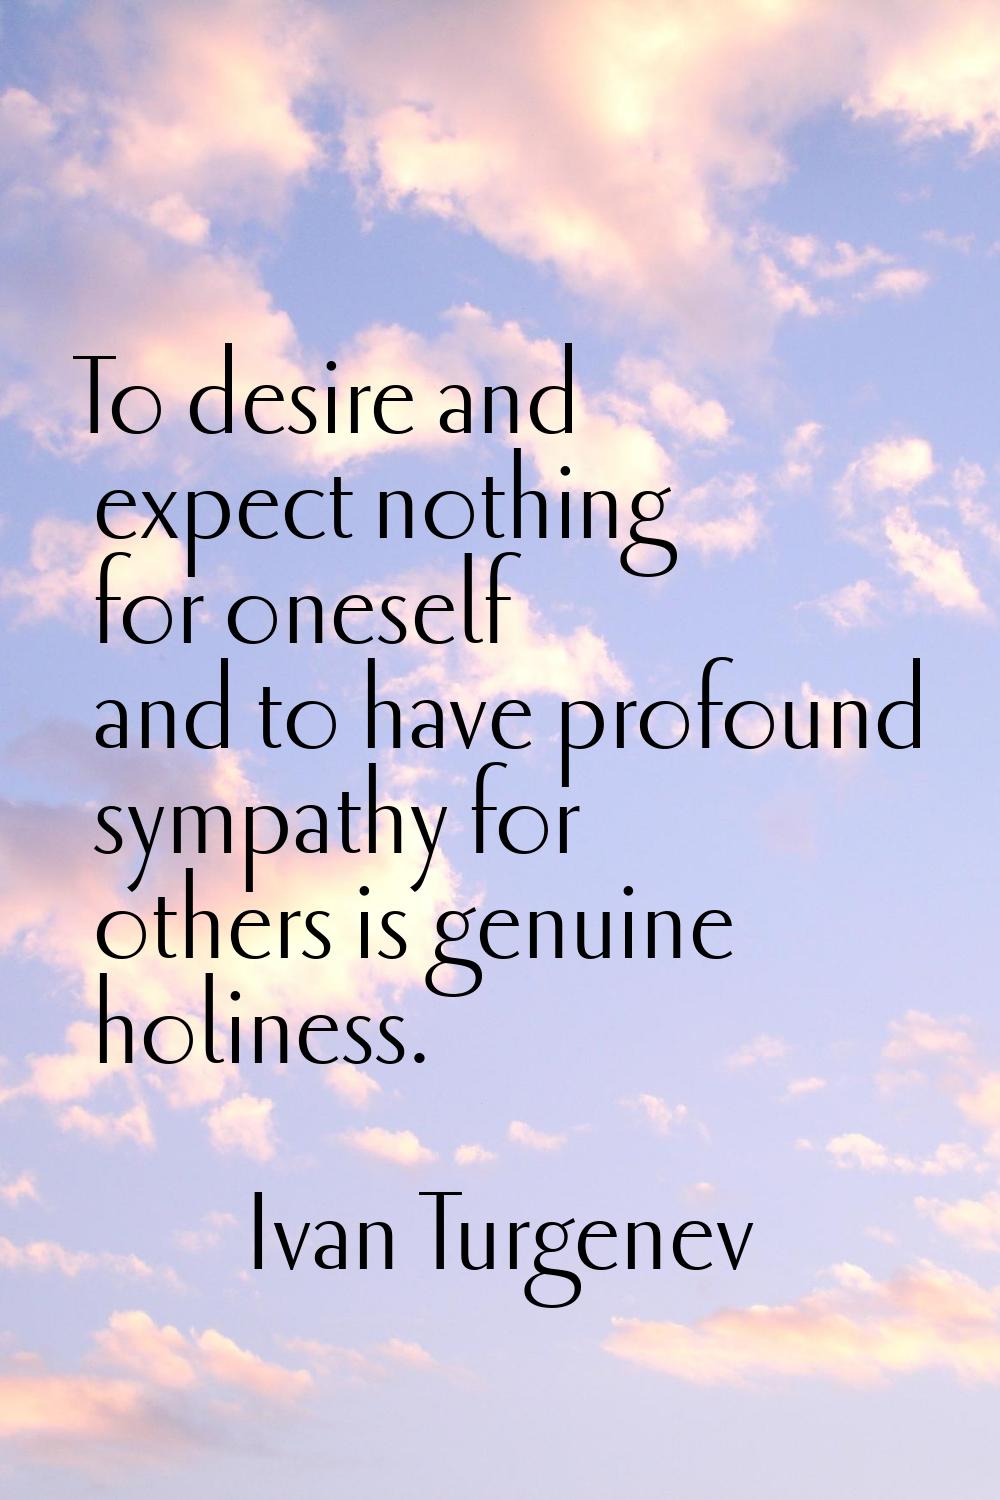 To desire and expect nothing for oneself and to have profound sympathy for others is genuine holine